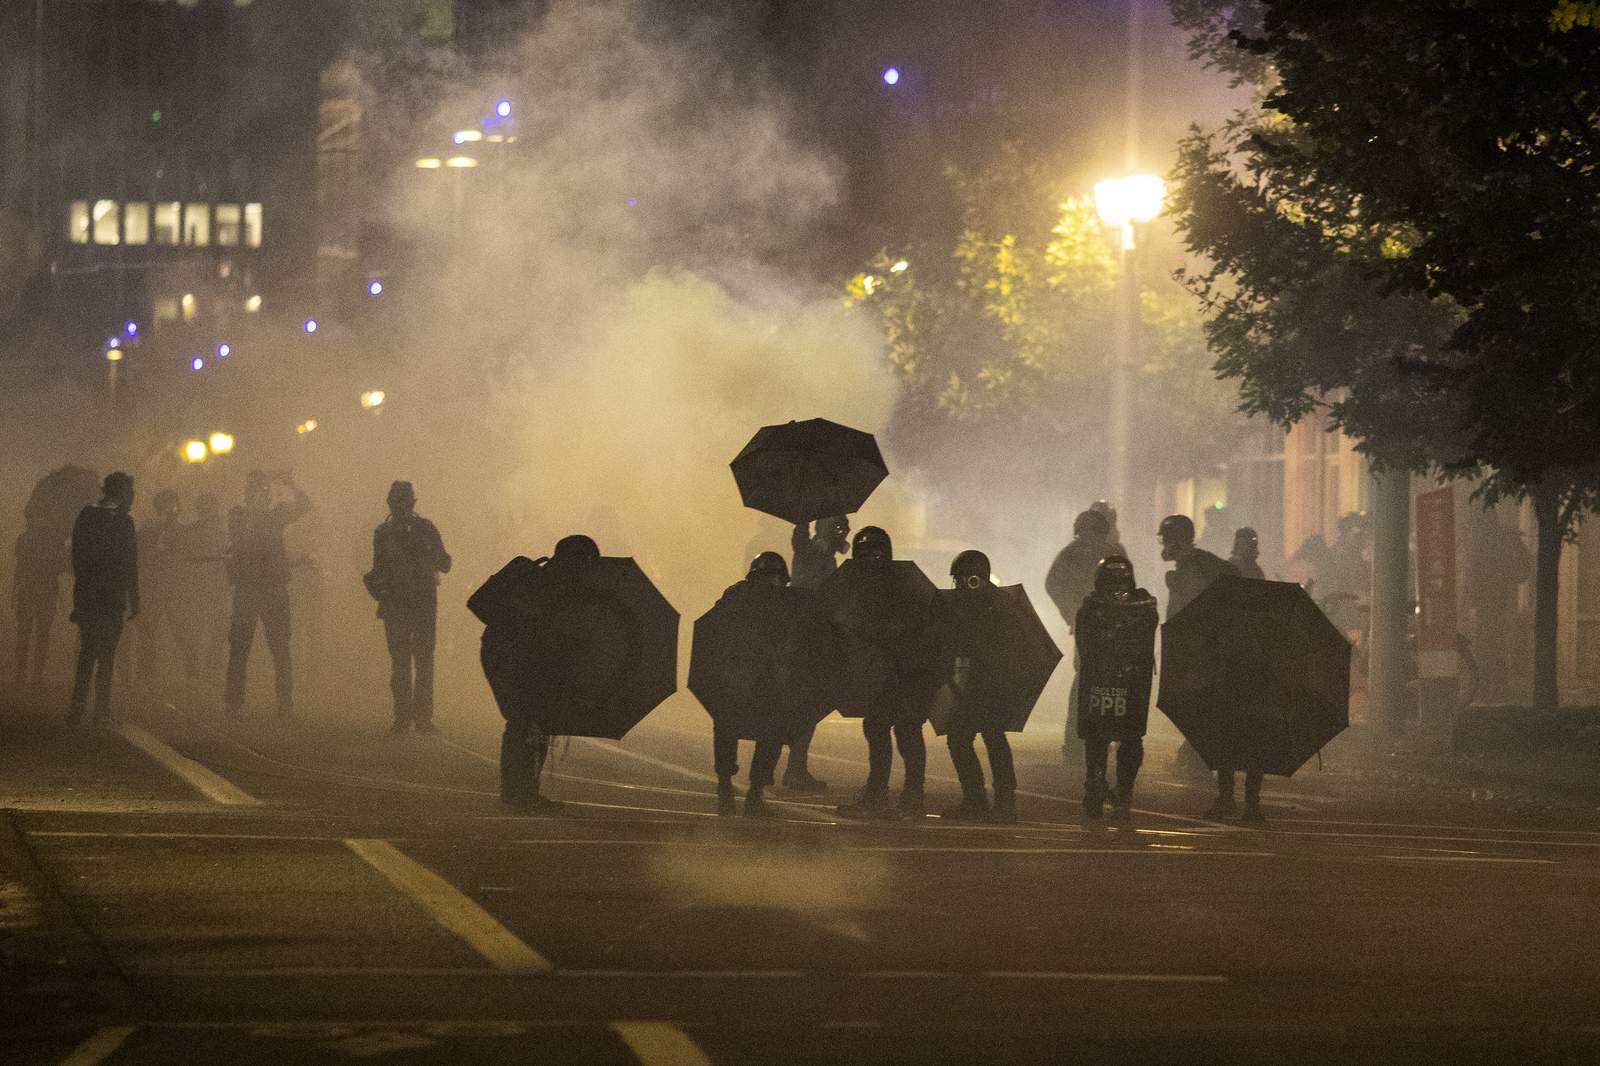 After wildfire smoke clears, protests resume in Portland